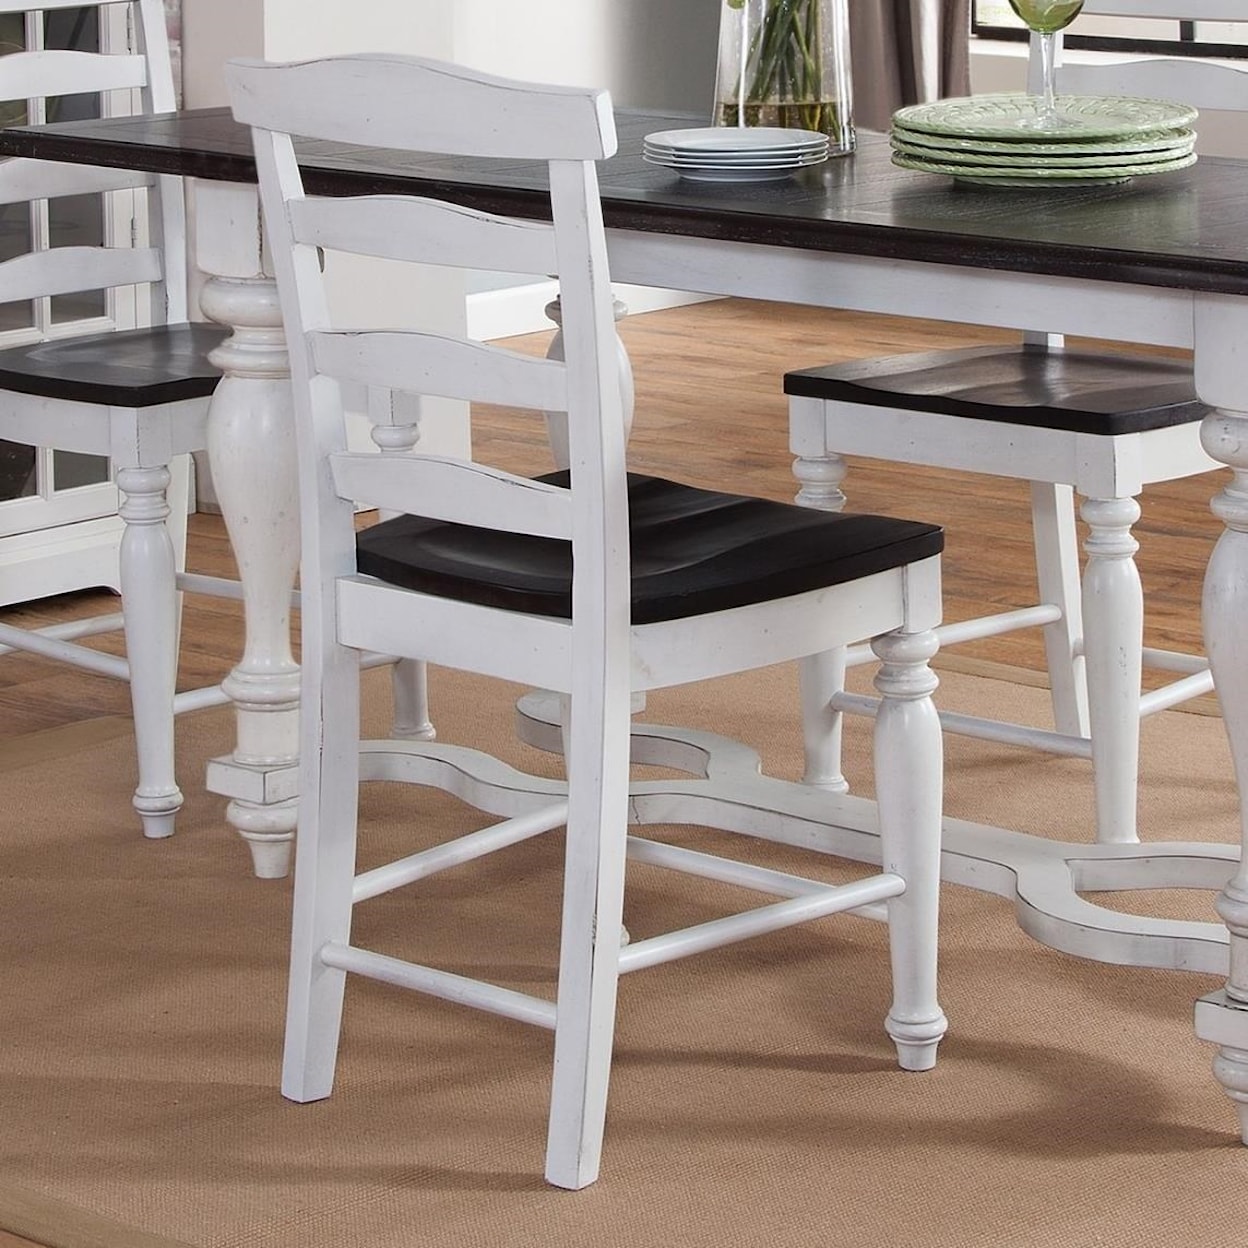 Sunny Designs Carriage House 24" Ladderback Stool